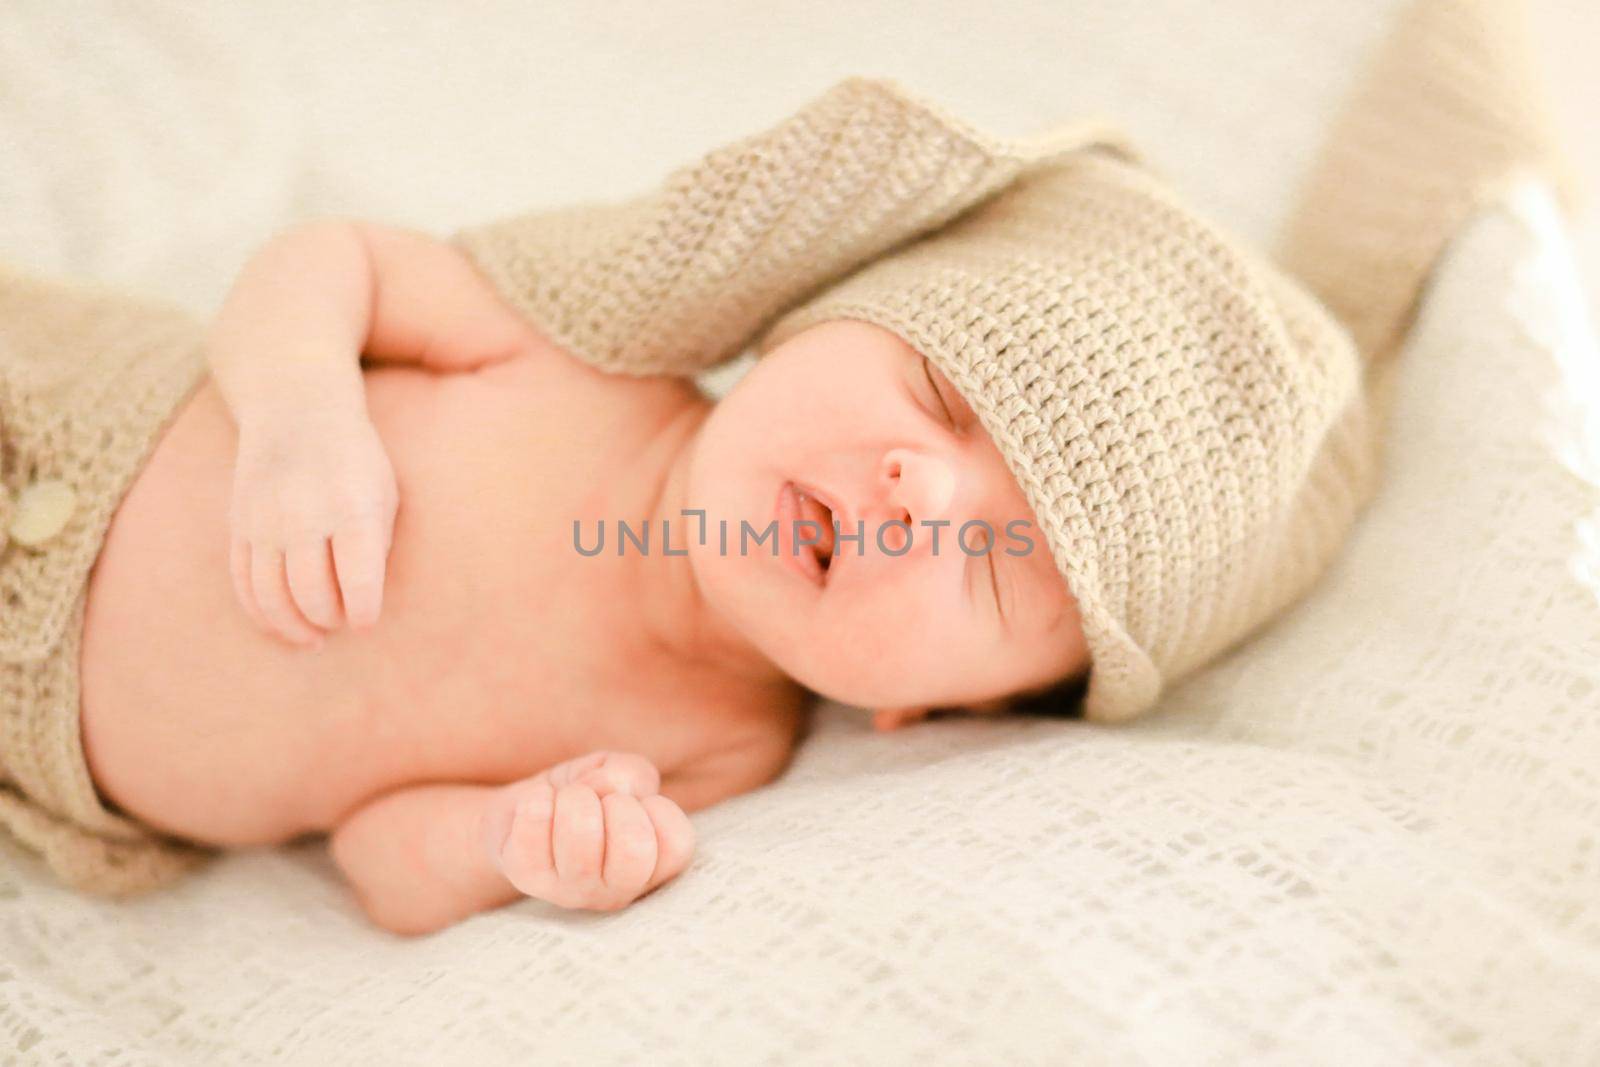 Nice newborn baby sleeping and wearing crocheted clothes, white background. Concept of babies and new life.